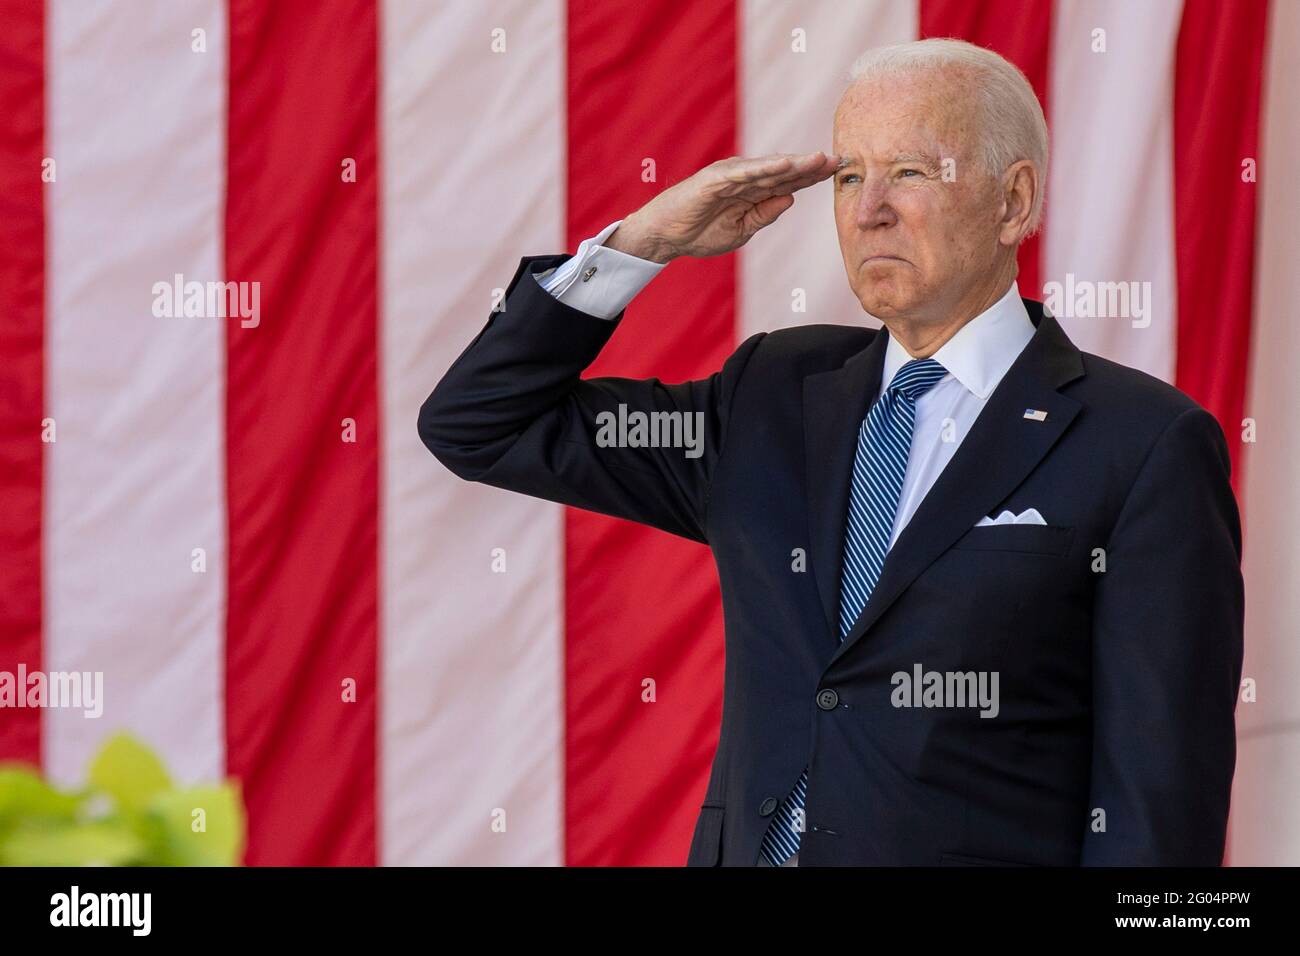 Arlington, United States Of America. 31st May, 2021. U.S President Joe Biden salutes during the annual Memorial Day commemoration in the Memorial Amphitheater at Arlington National Cemetery May 31, 2021 Arlington, Virginia. Credit: Planetpix/Alamy Live News Stock Photo